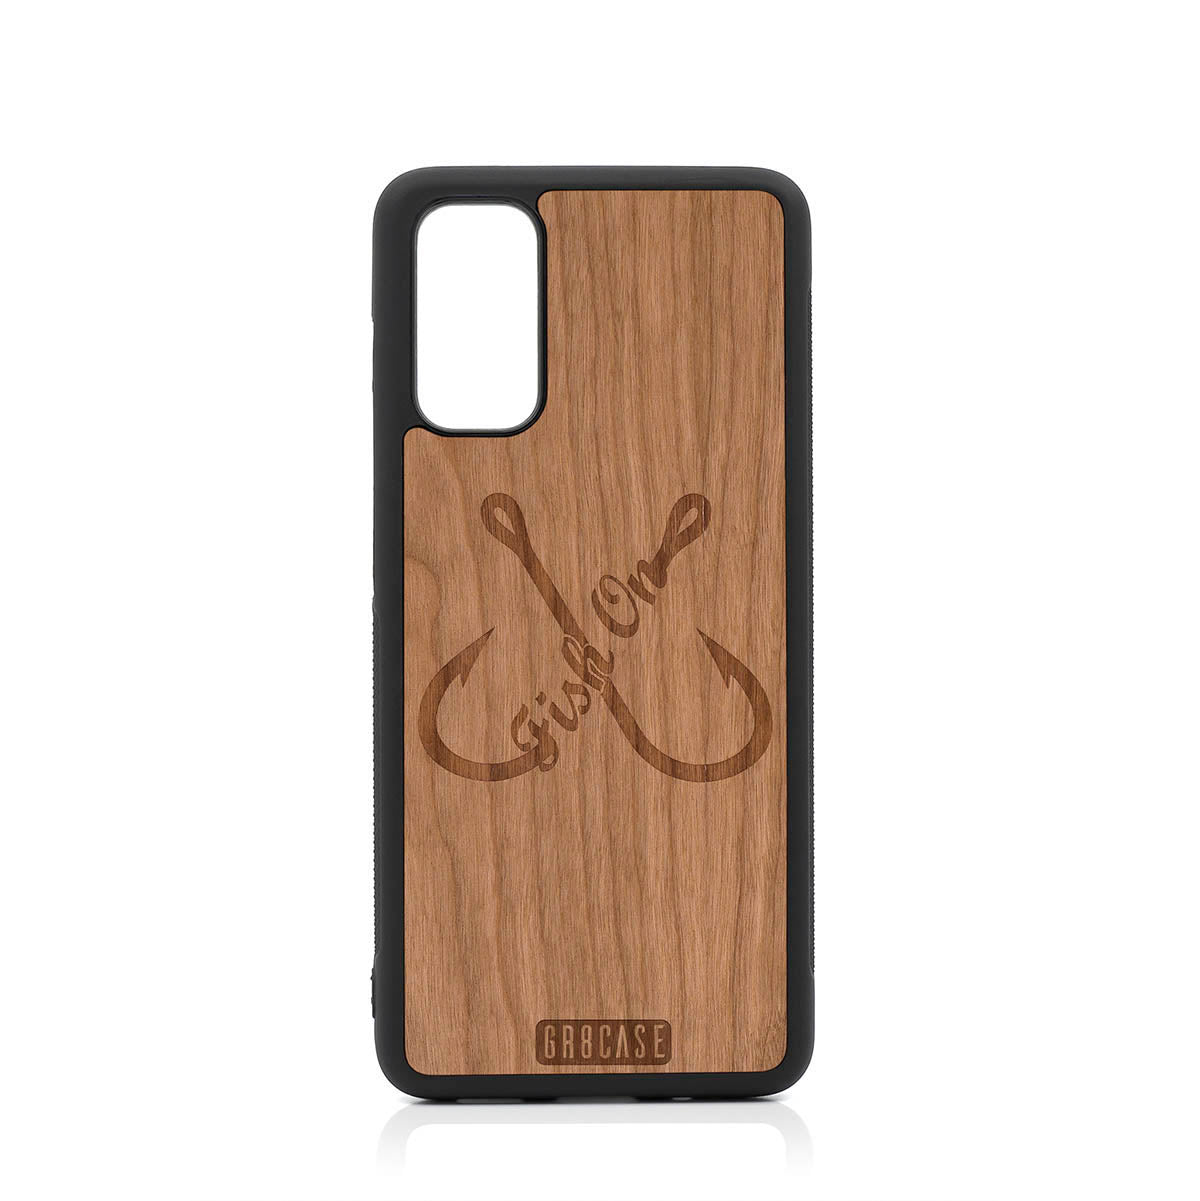 Fish On (Fish Hooks) Design Wood Case For Samsung Galaxy S20 by GR8CASE